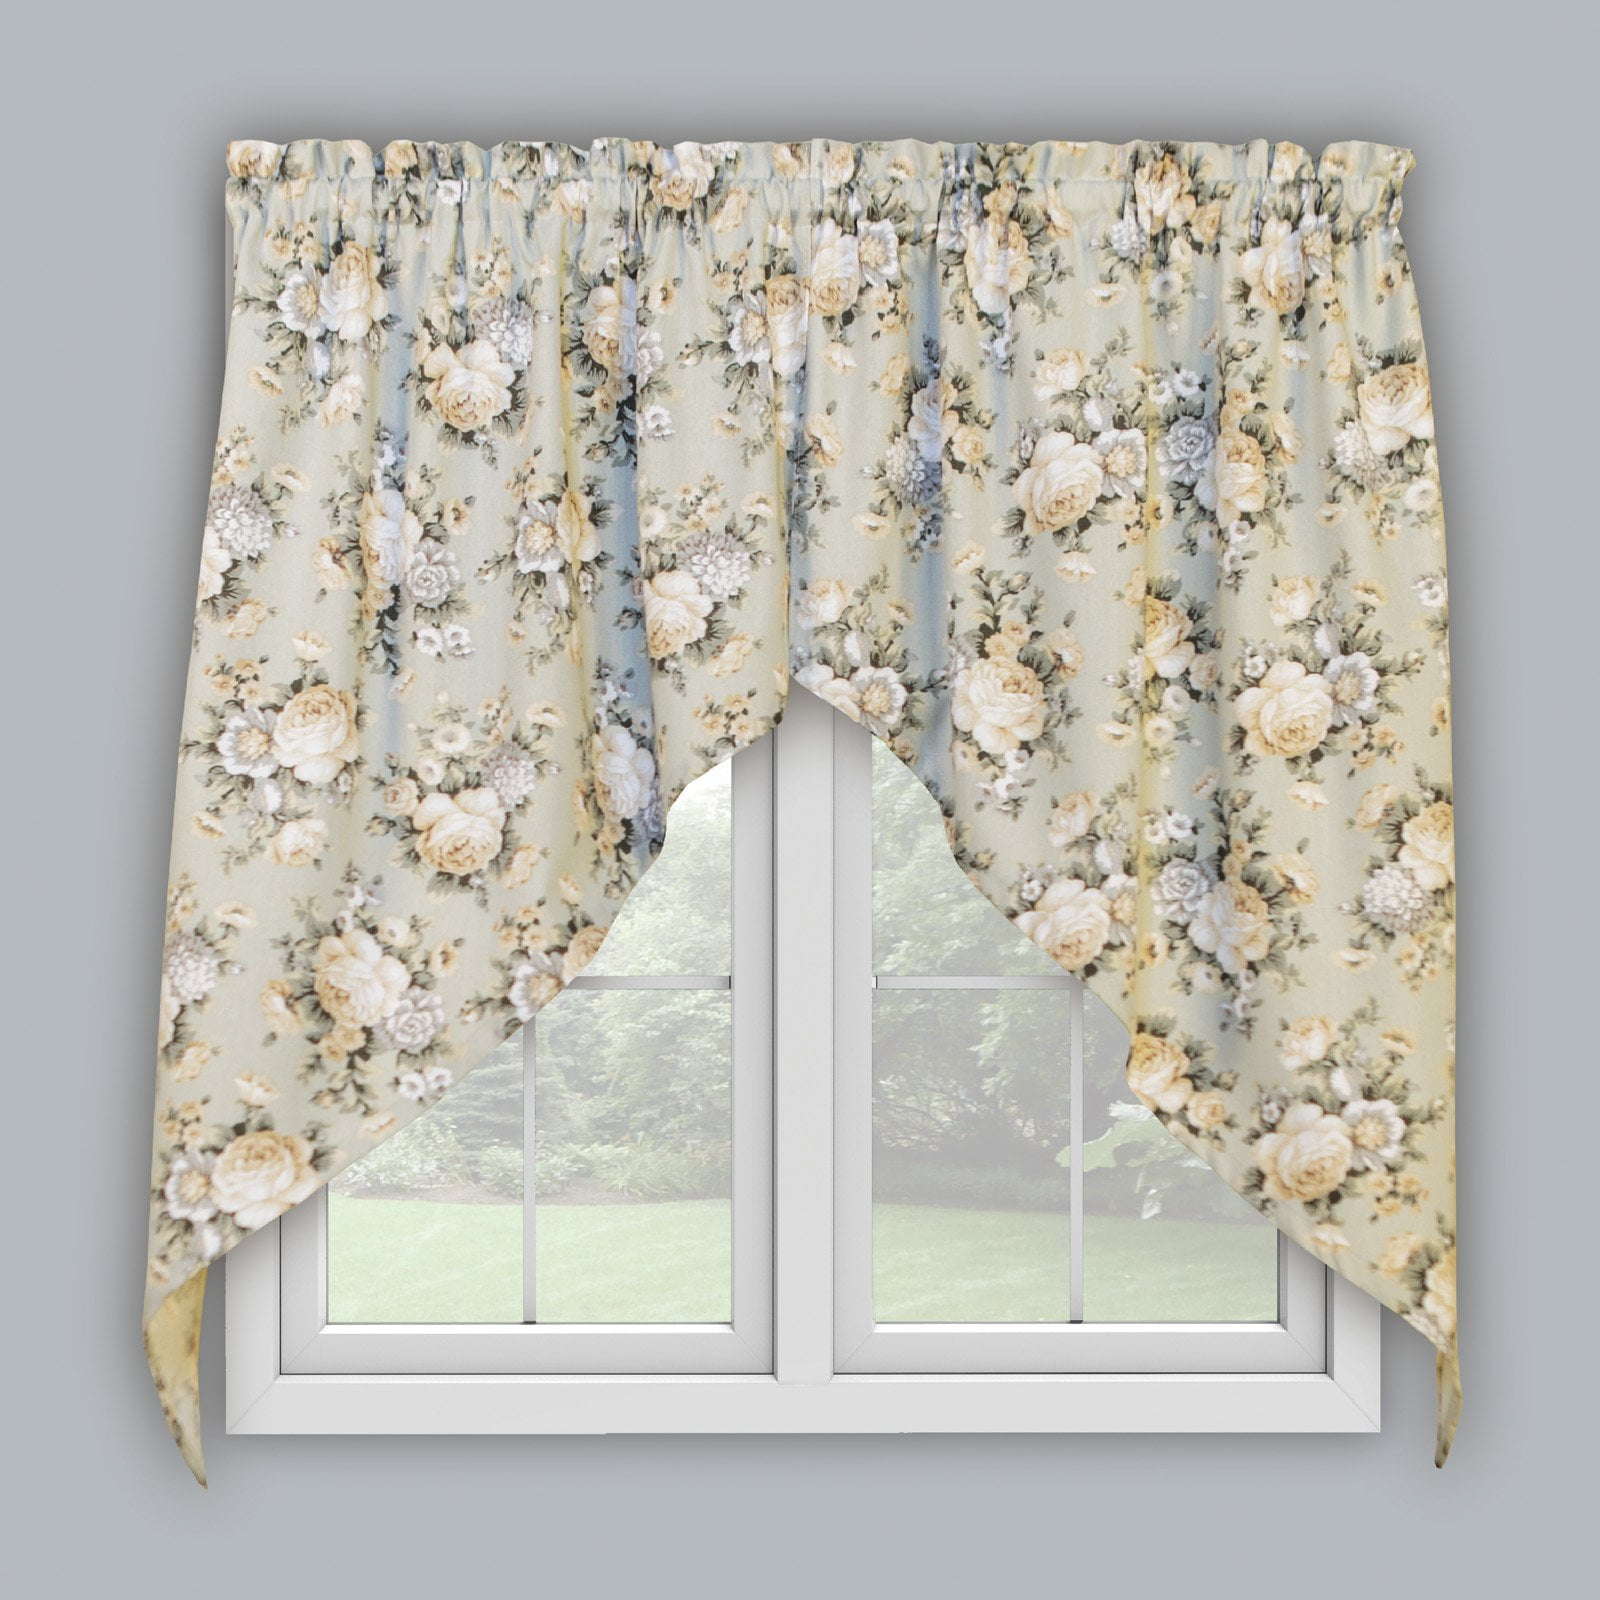 White Ruffled Swag Valance Curtain  82" Wide x 36 Long 